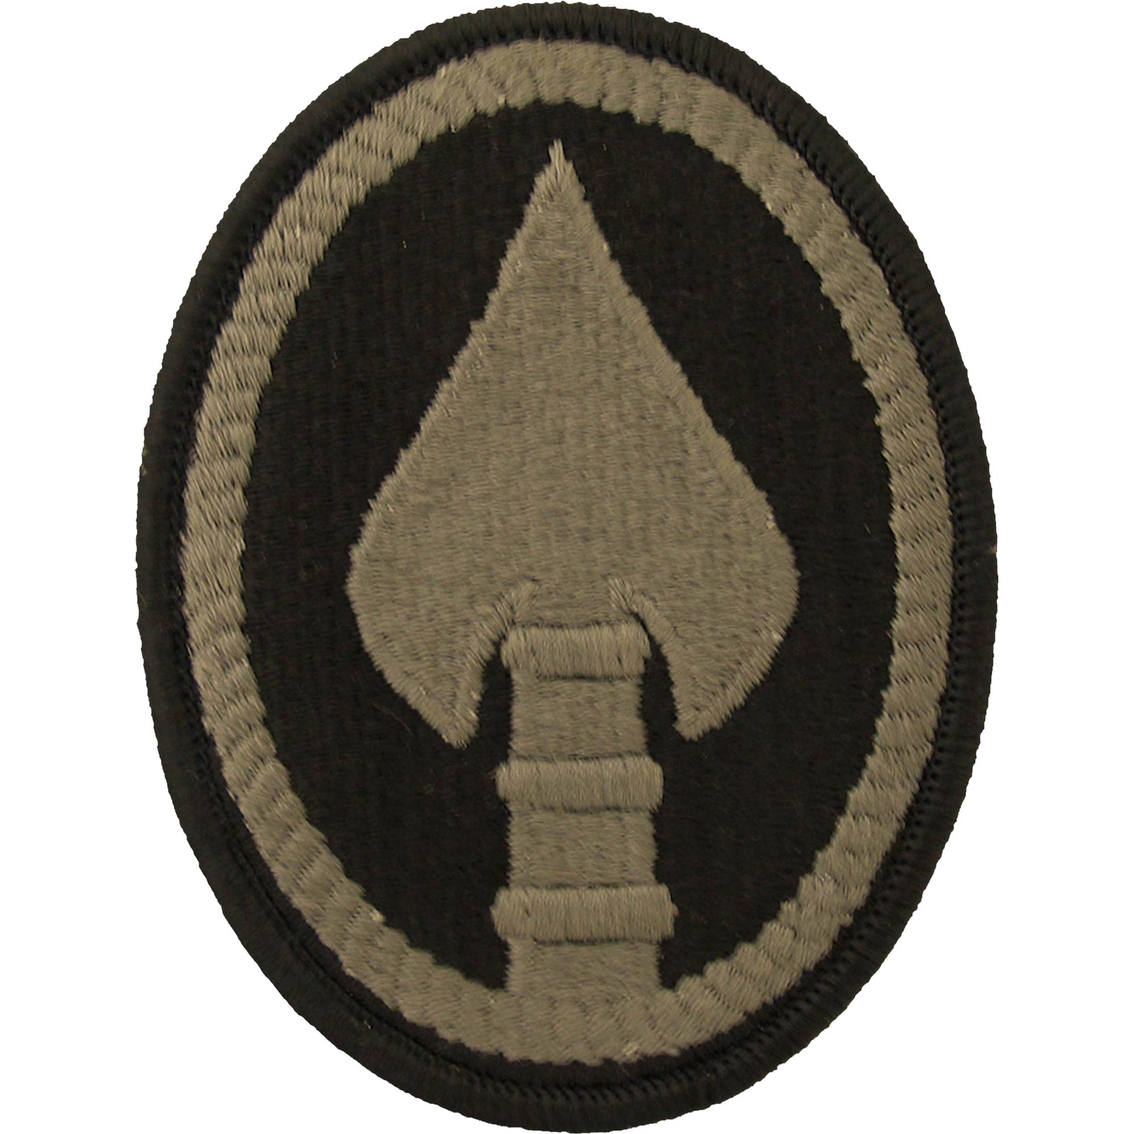 Army Ocp Patches - Army Military